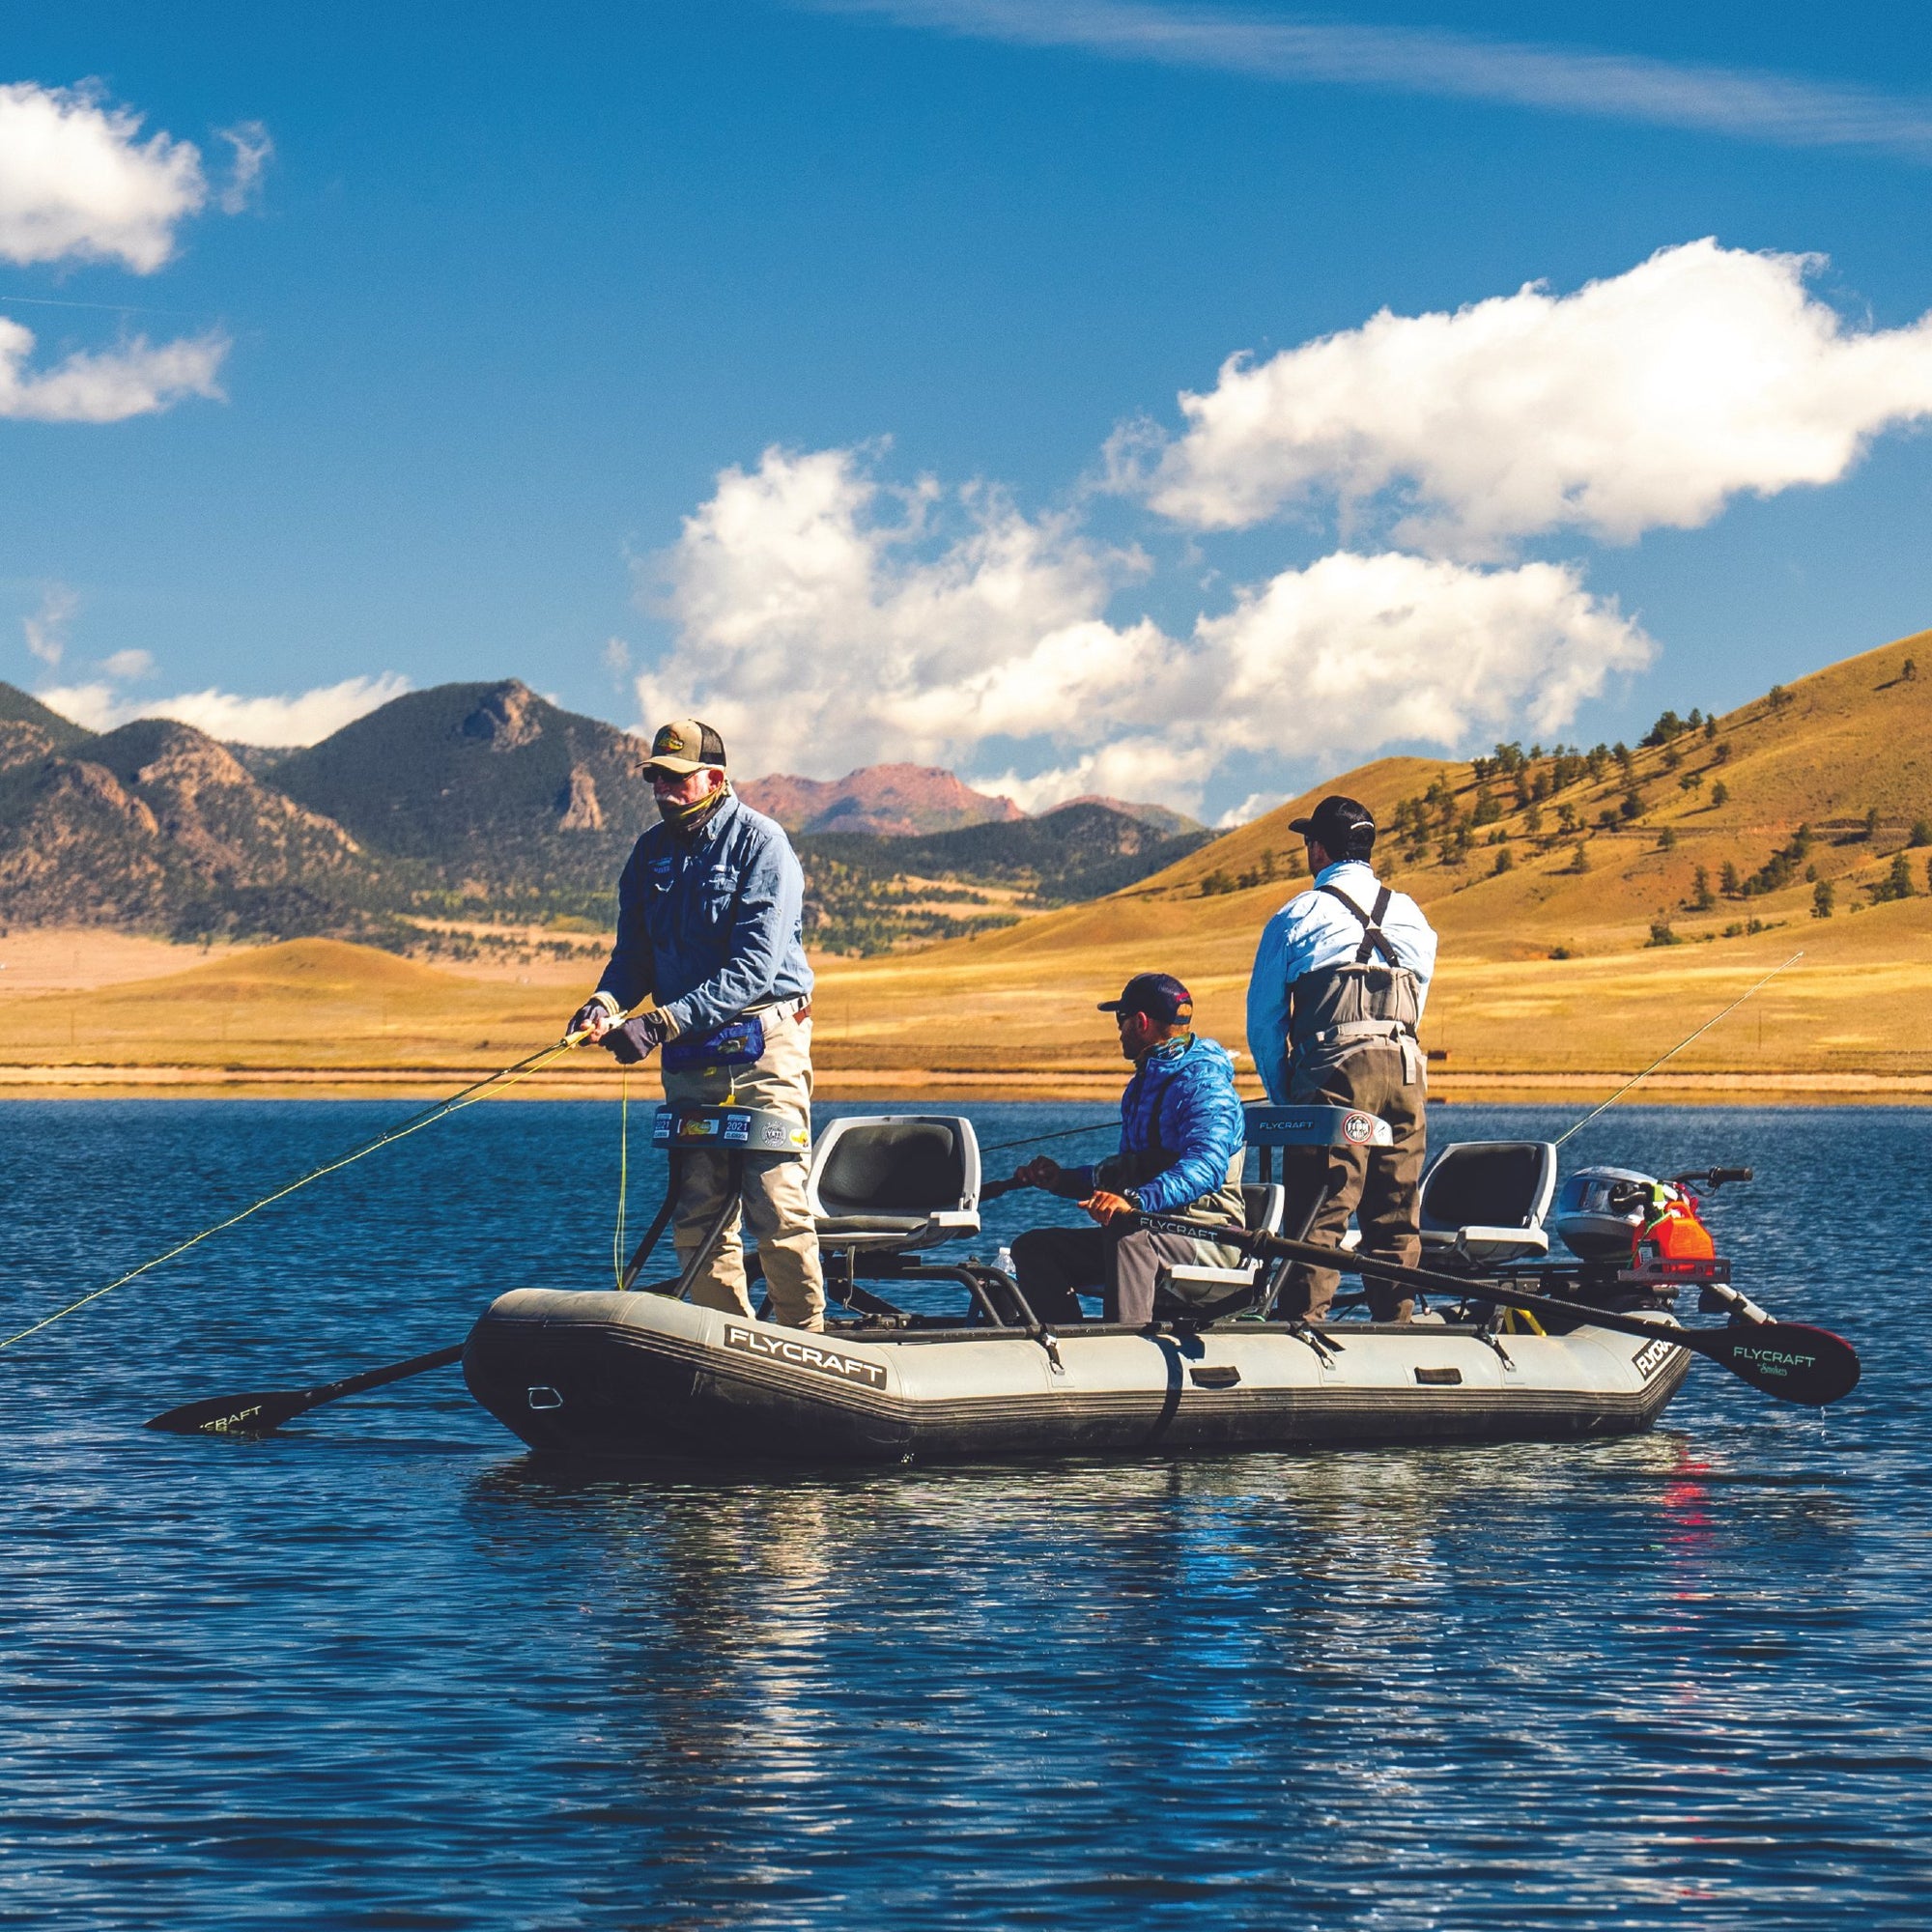 Flycraft’s Inflatable Fishing Boat: Guide Base Package (3-Man)